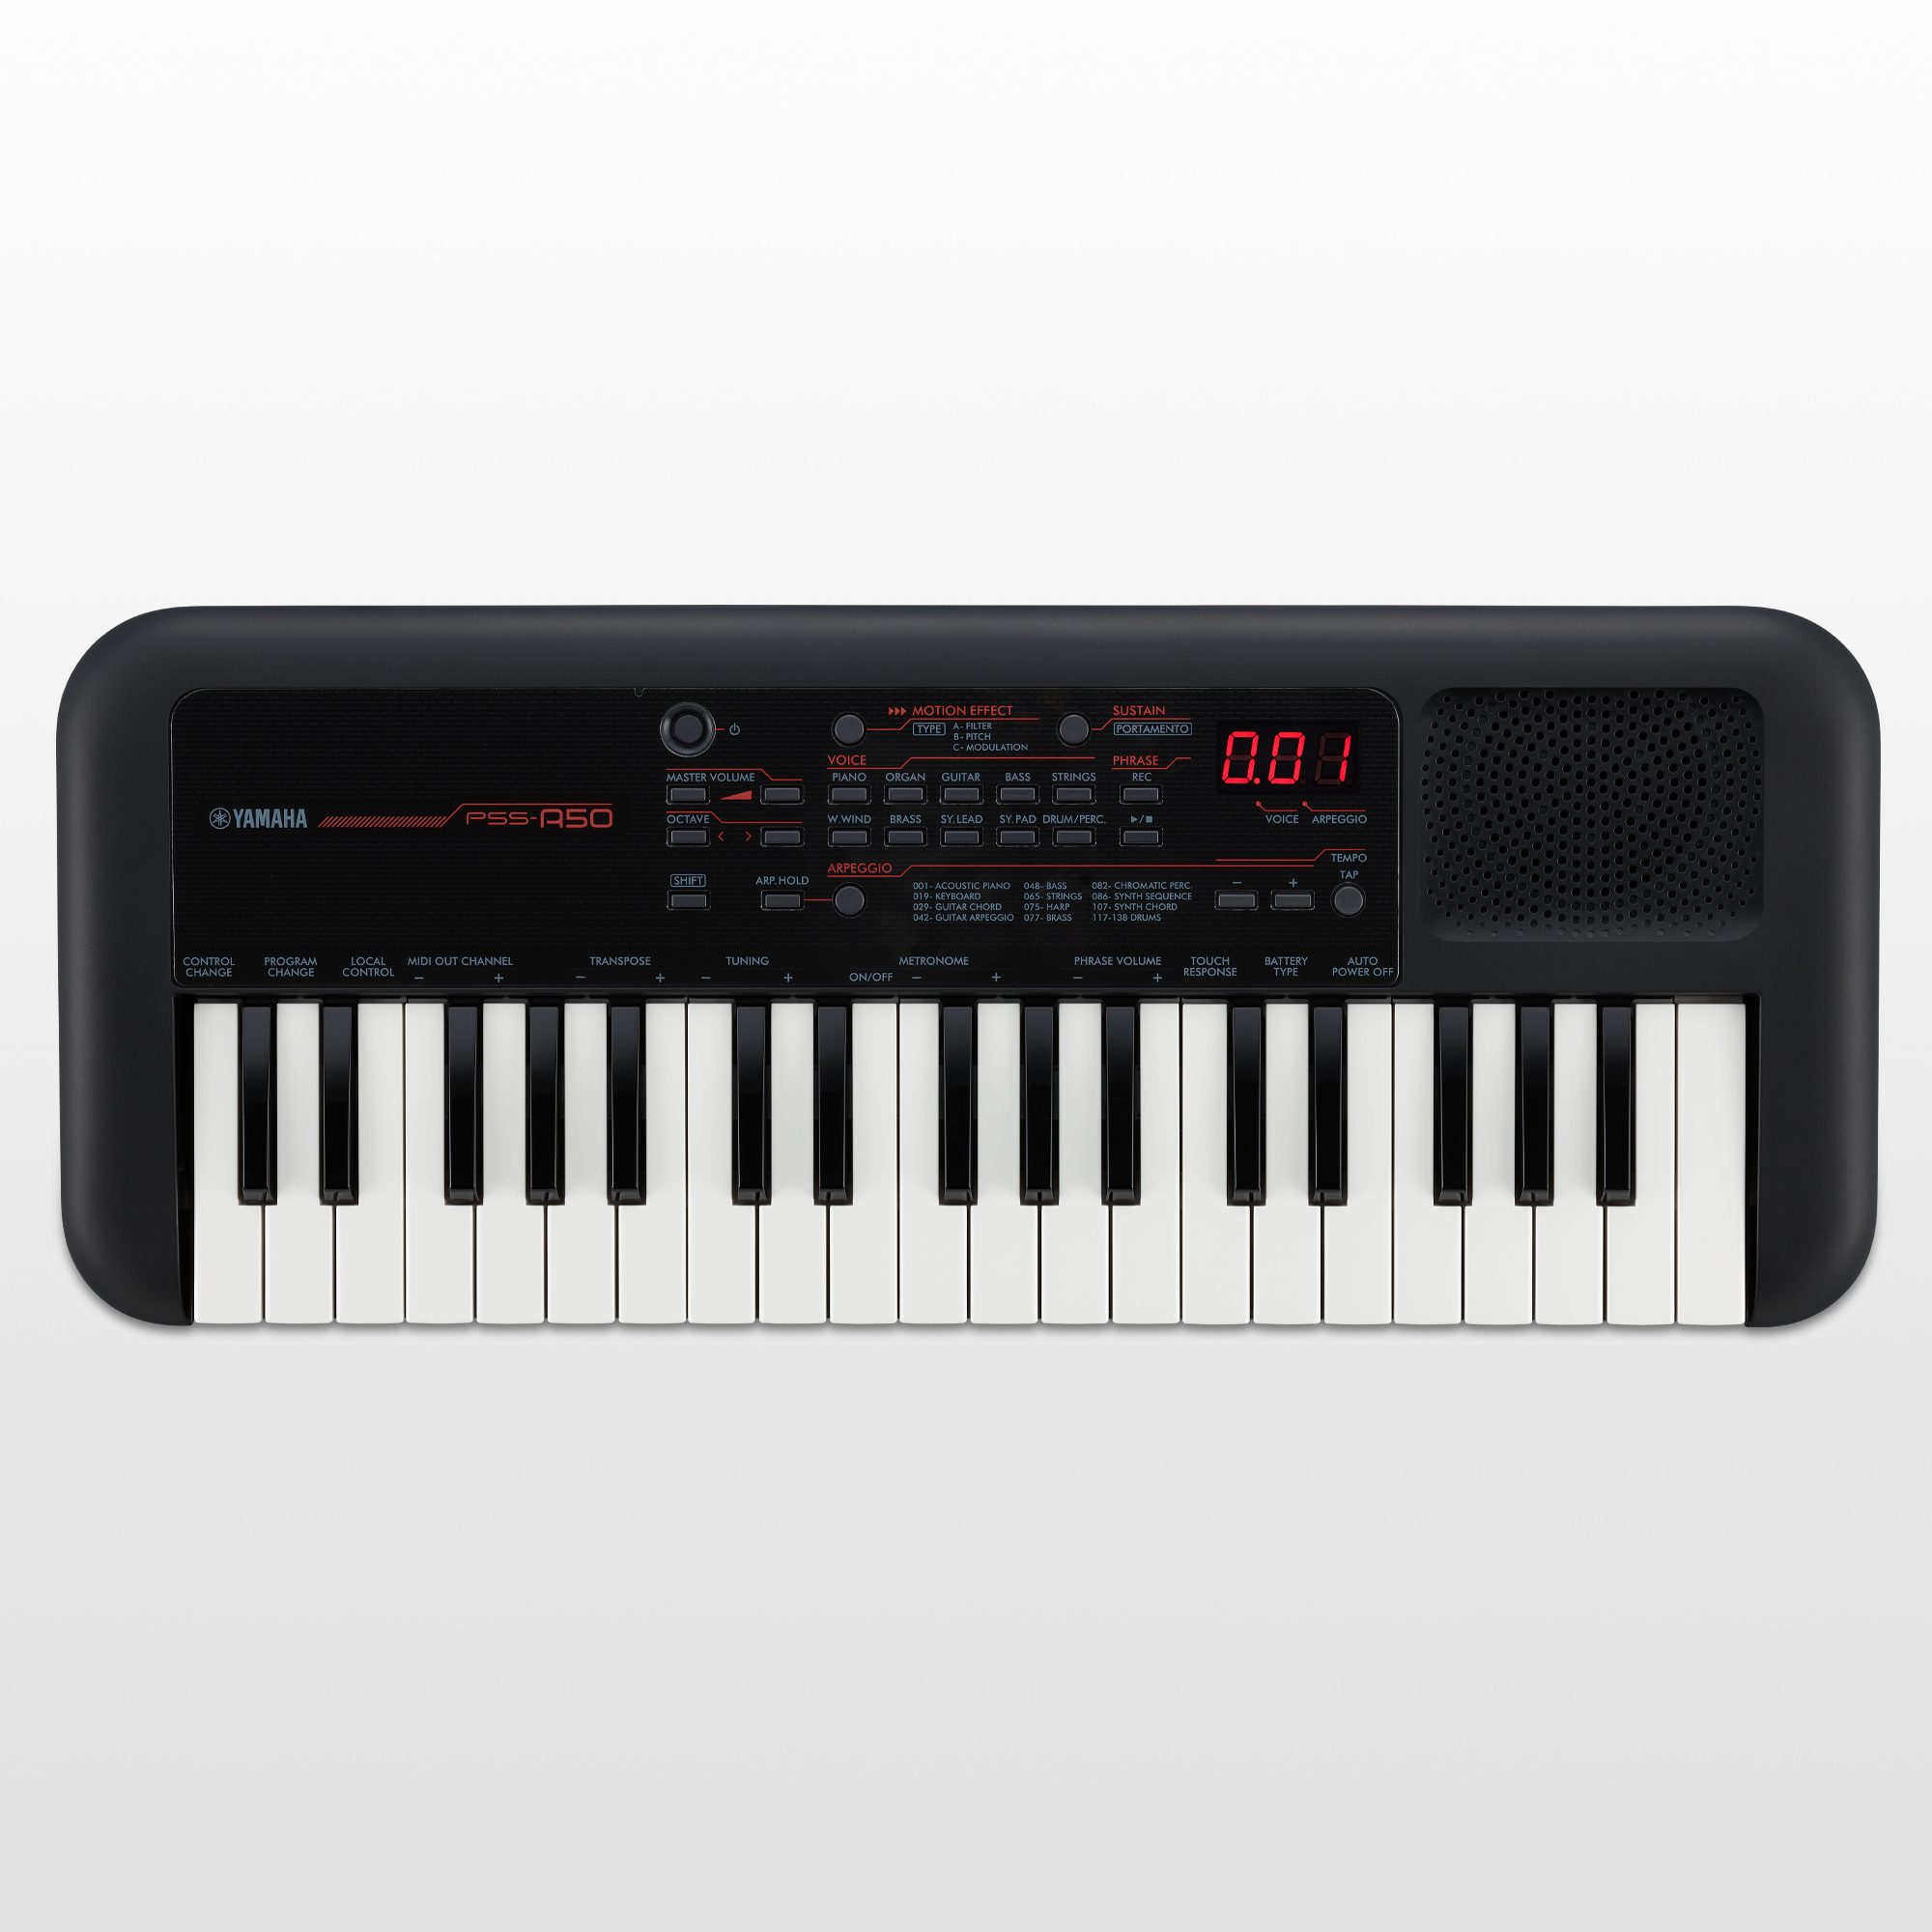 Portable Keyboards - Keyboard Instruments - Musical Instruments 